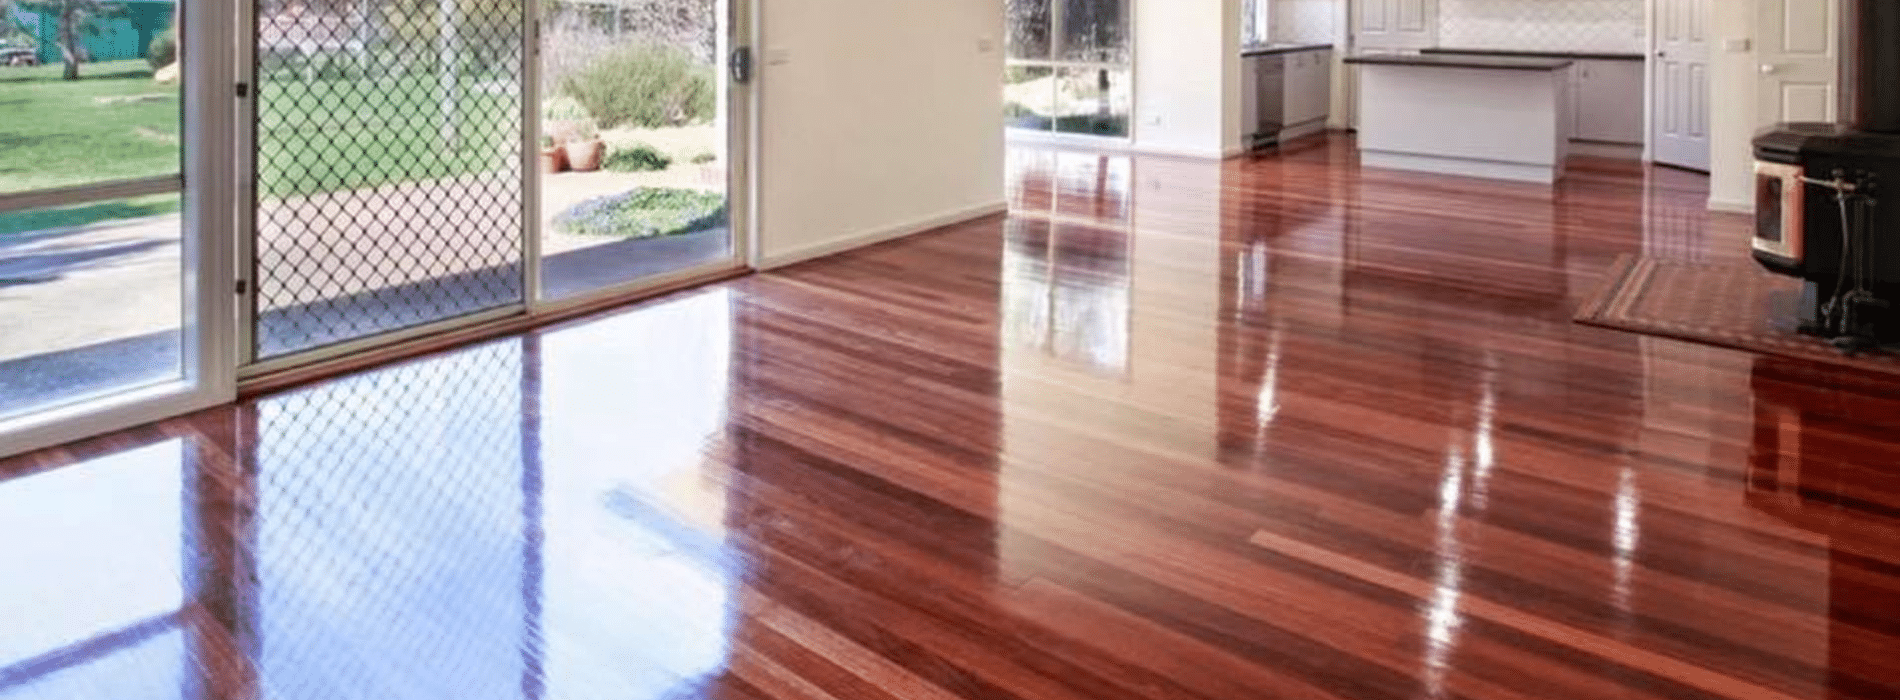 Expertly restored 8-year-old hardwood floor in Strand, WC2. Bona 2K Frost whitewashing and Traffic HD 15% sheen matte lacquer used by Mr Sander®. Durable and stunning finish for long-lasting beauty.